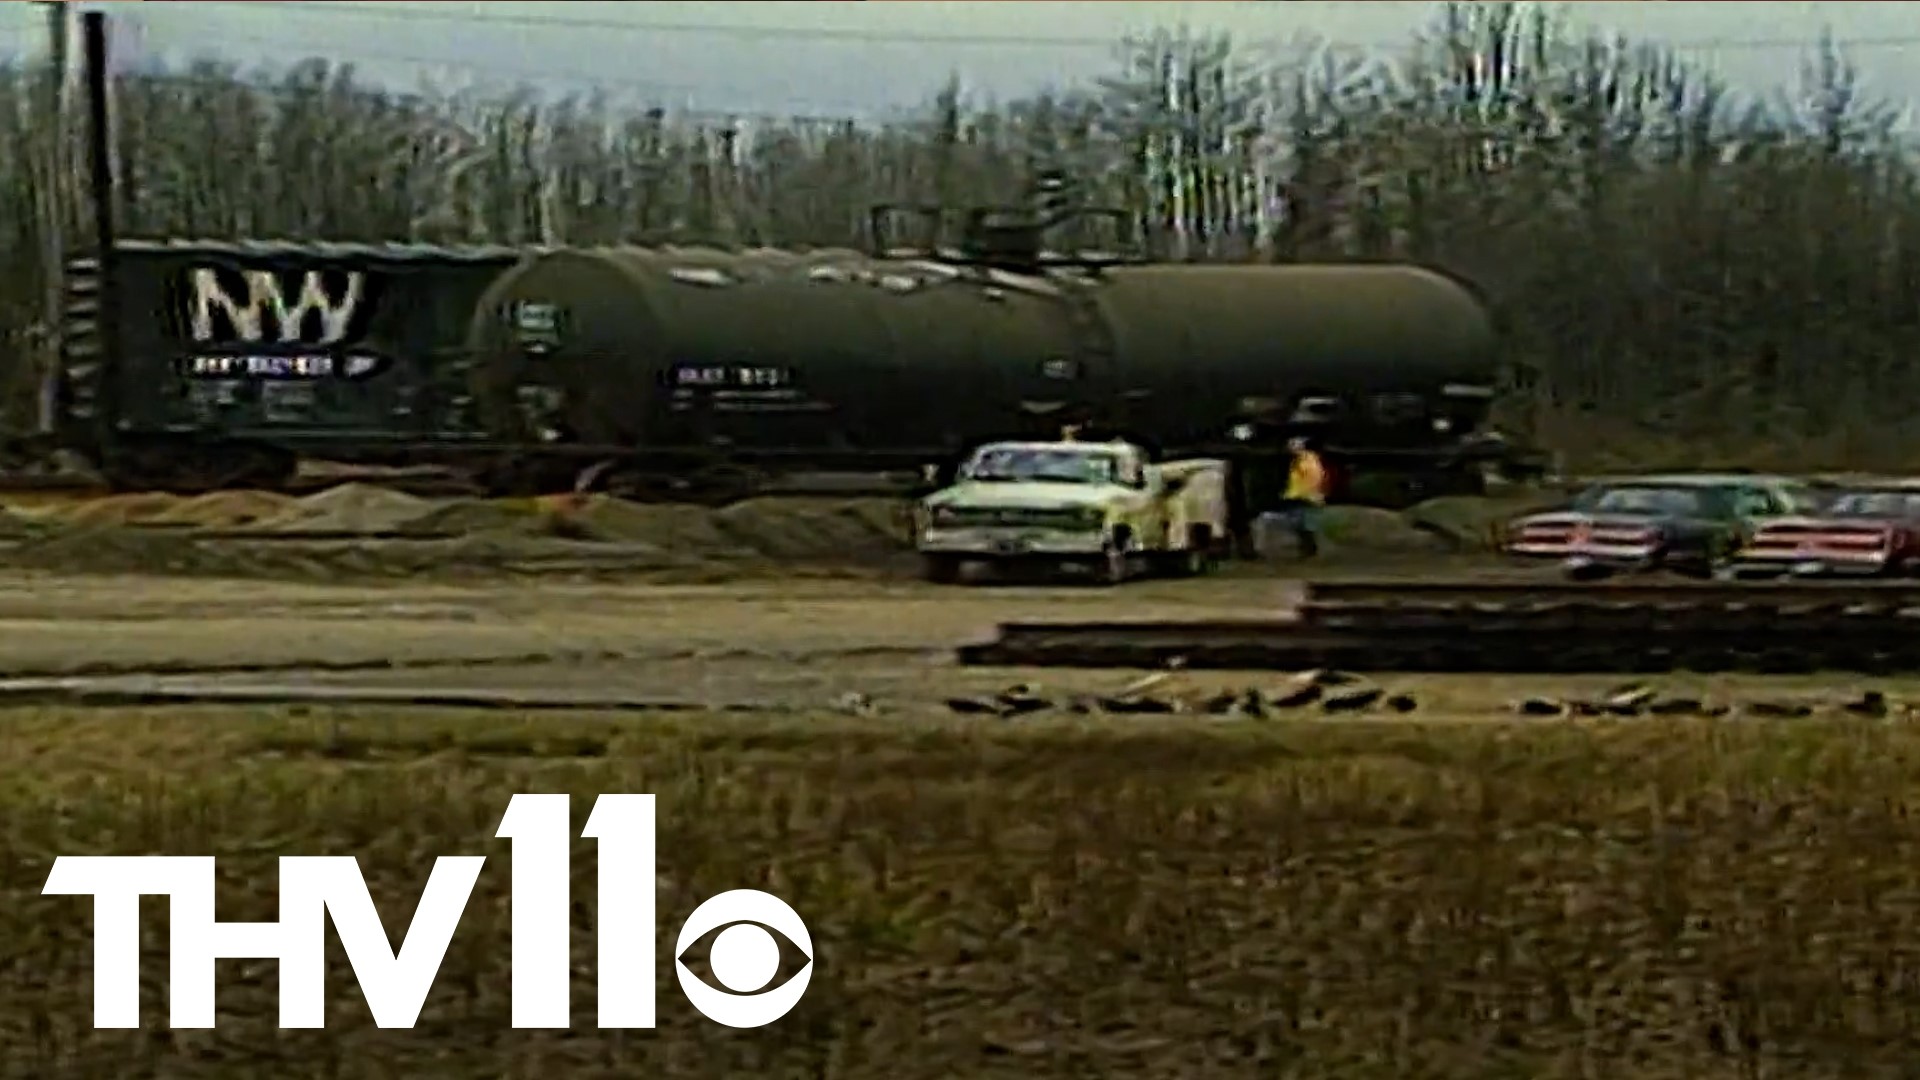 Following the catastrophic derailment in Ohio, North Little Rock officials are reminded of a similar derailment that forced citizens to evacuate nearly 40 years ago.